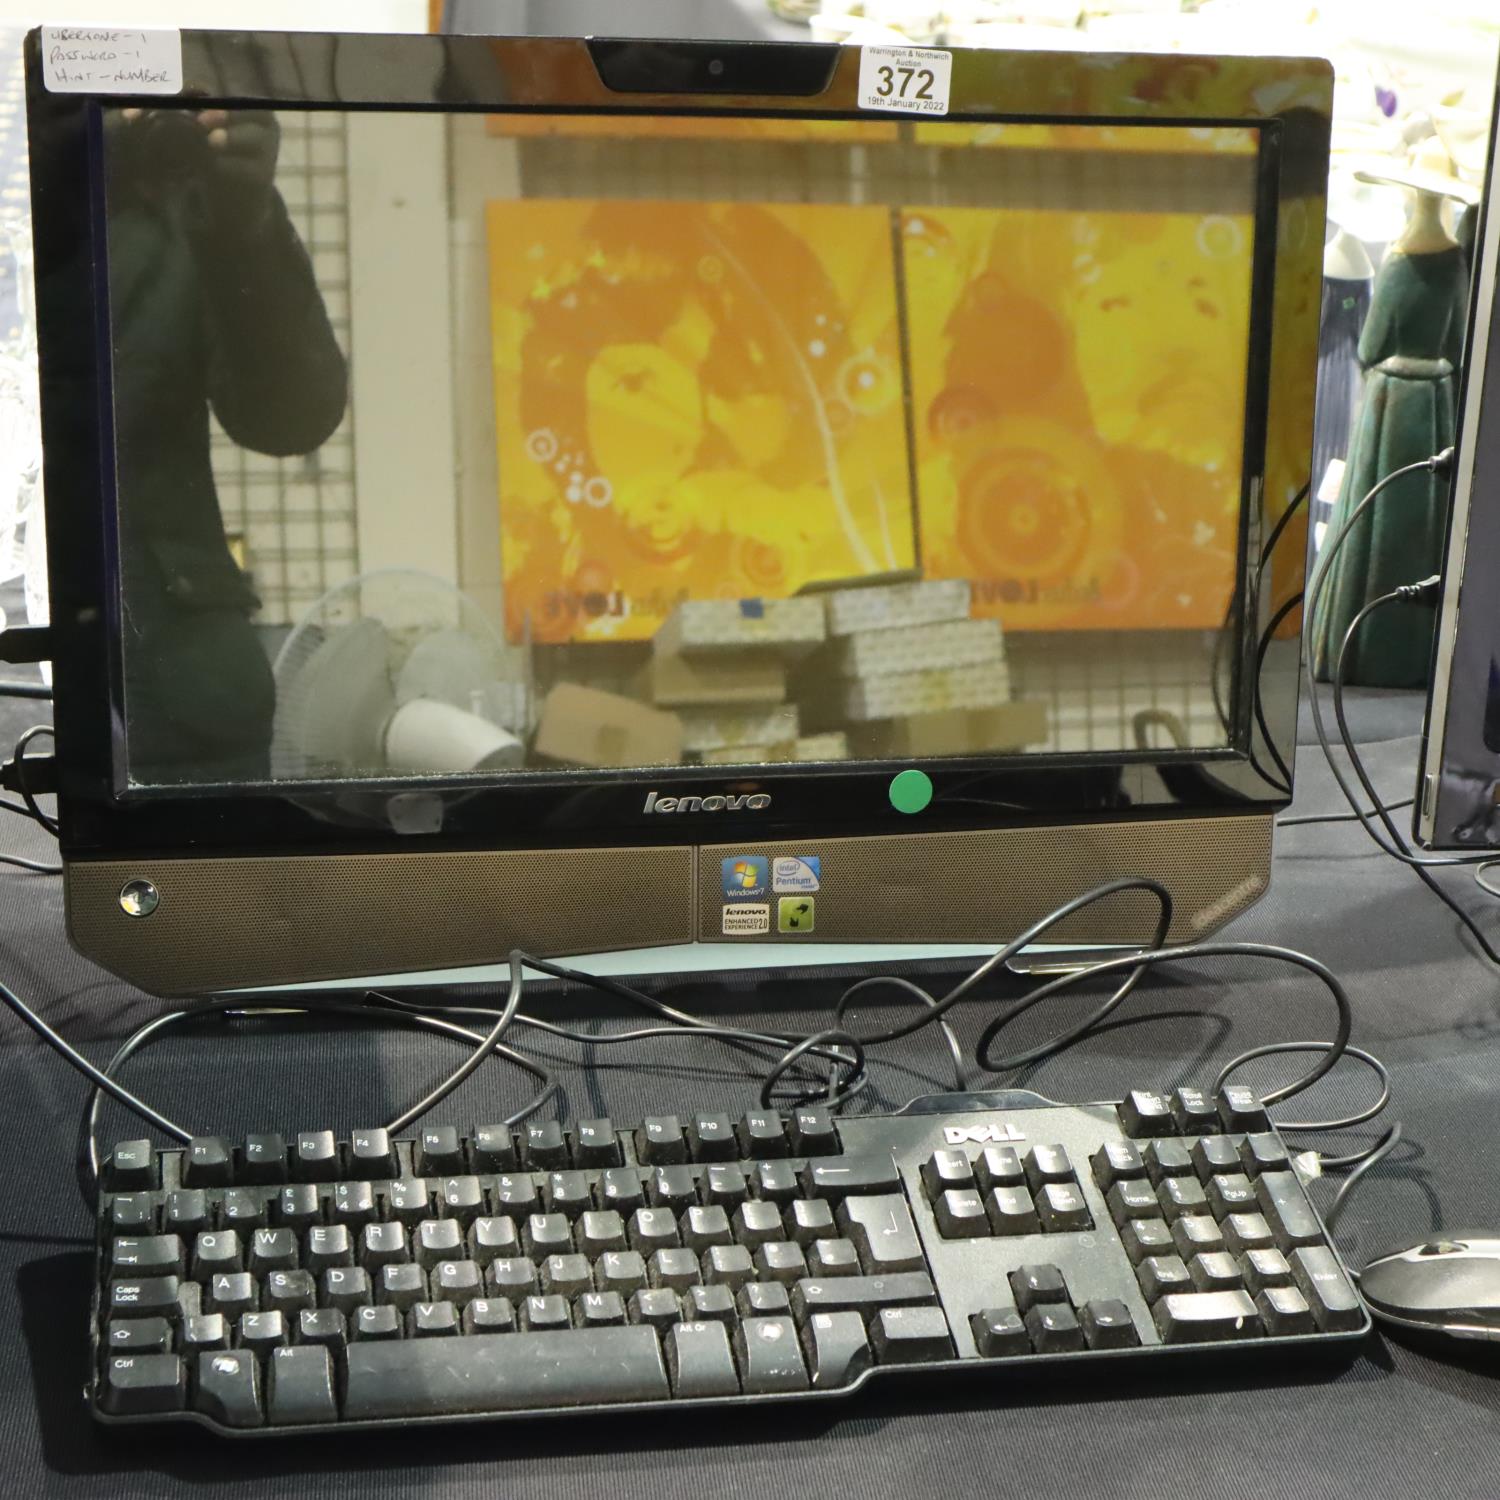 Lenovo all in one PC, running OS Windows 7, with keyboard, mouse and power supply, username and